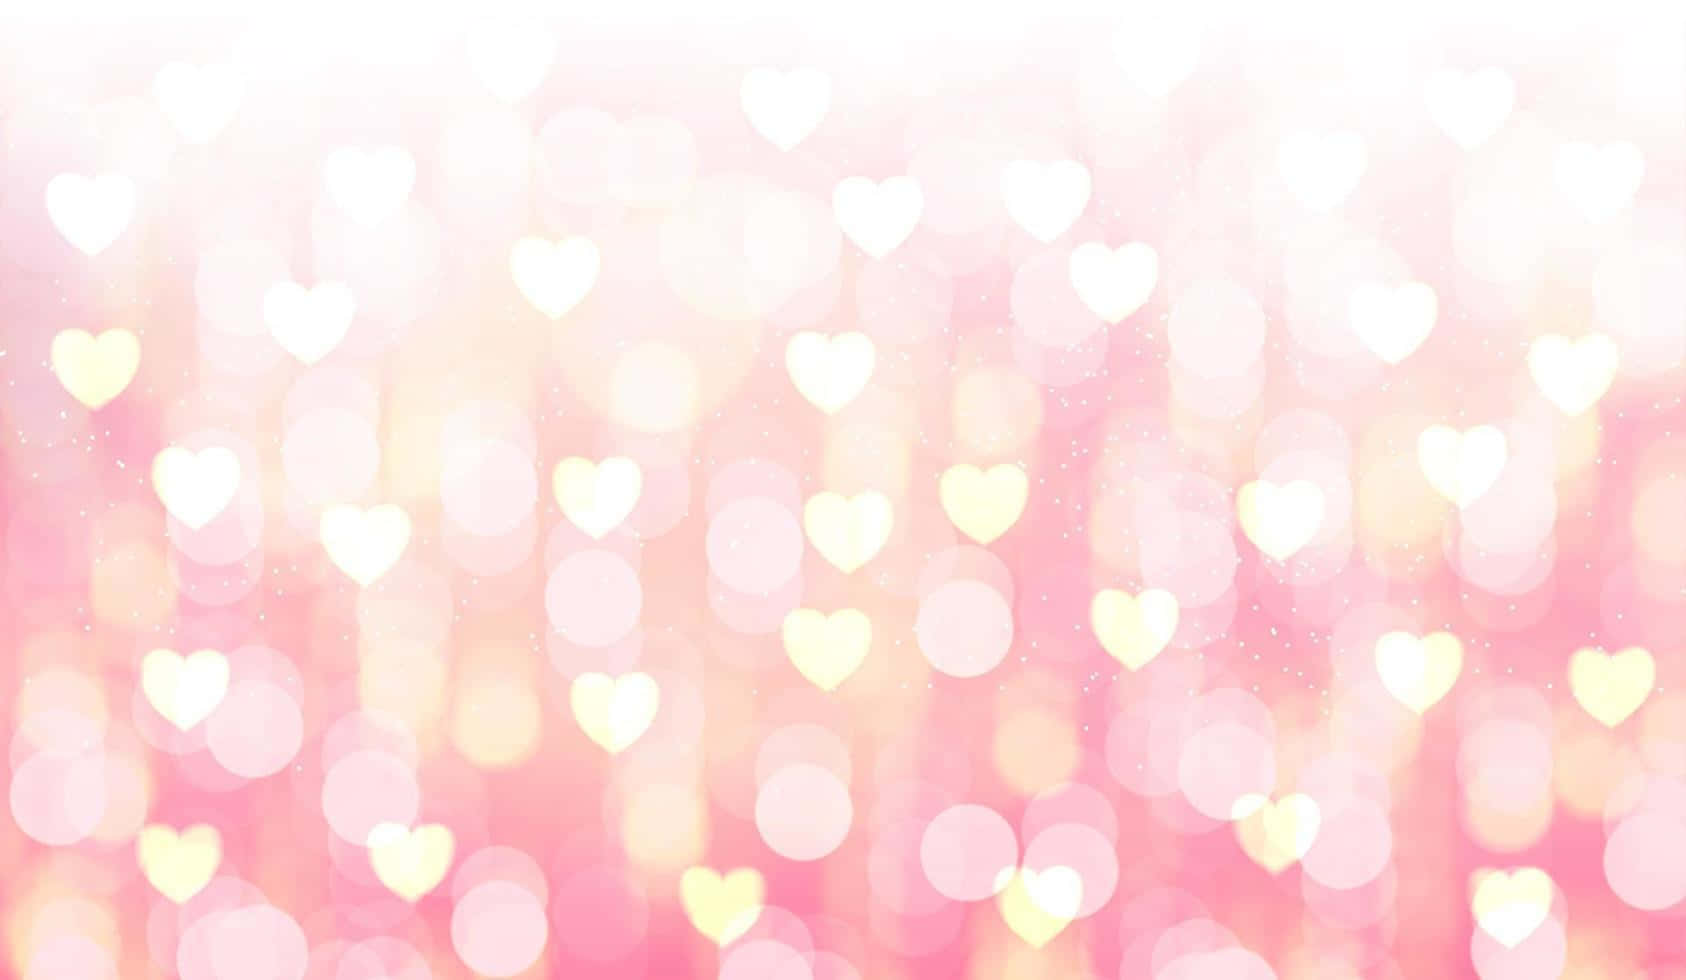 •  Soft, dreamy shade of pink for your background